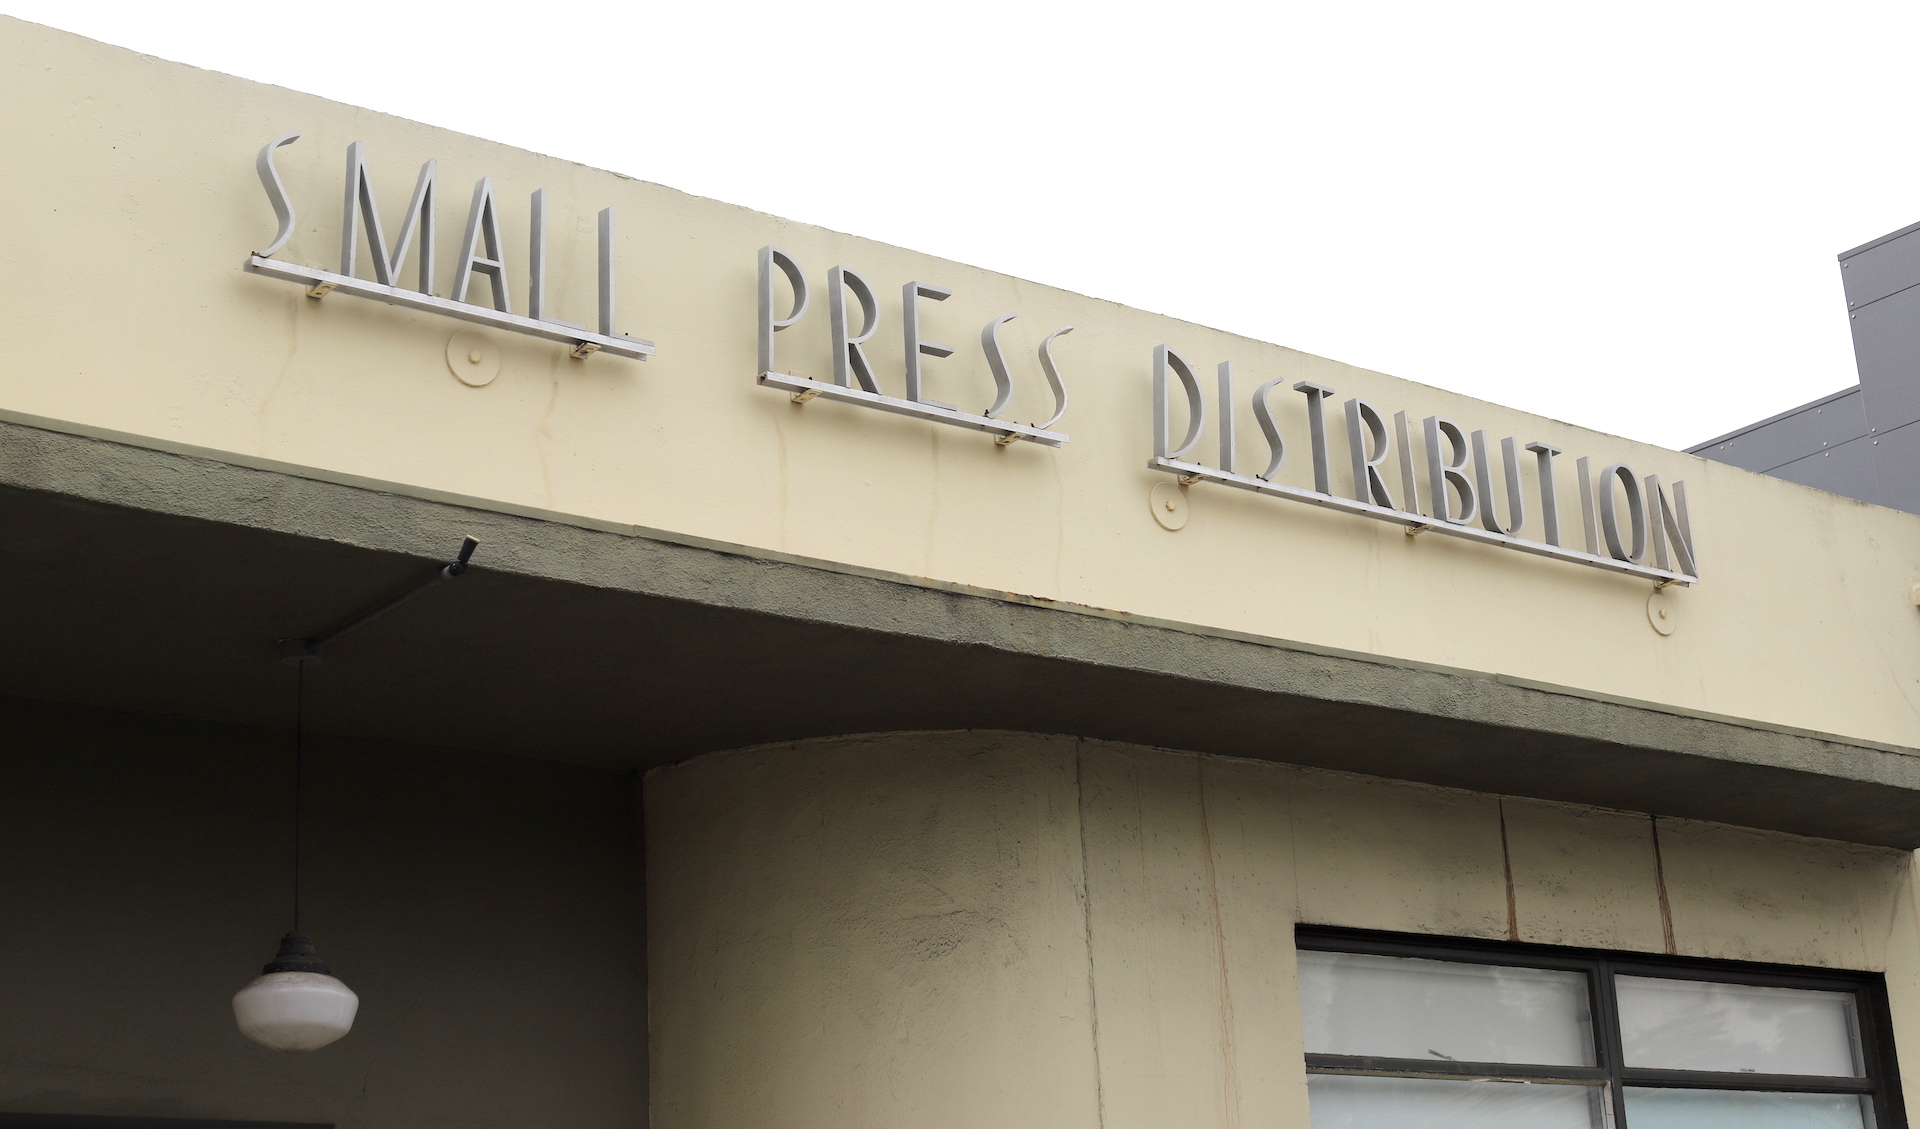 Small Press Distribution, founded in 1969, has operated out of this Berkeley warehouse since 1995.